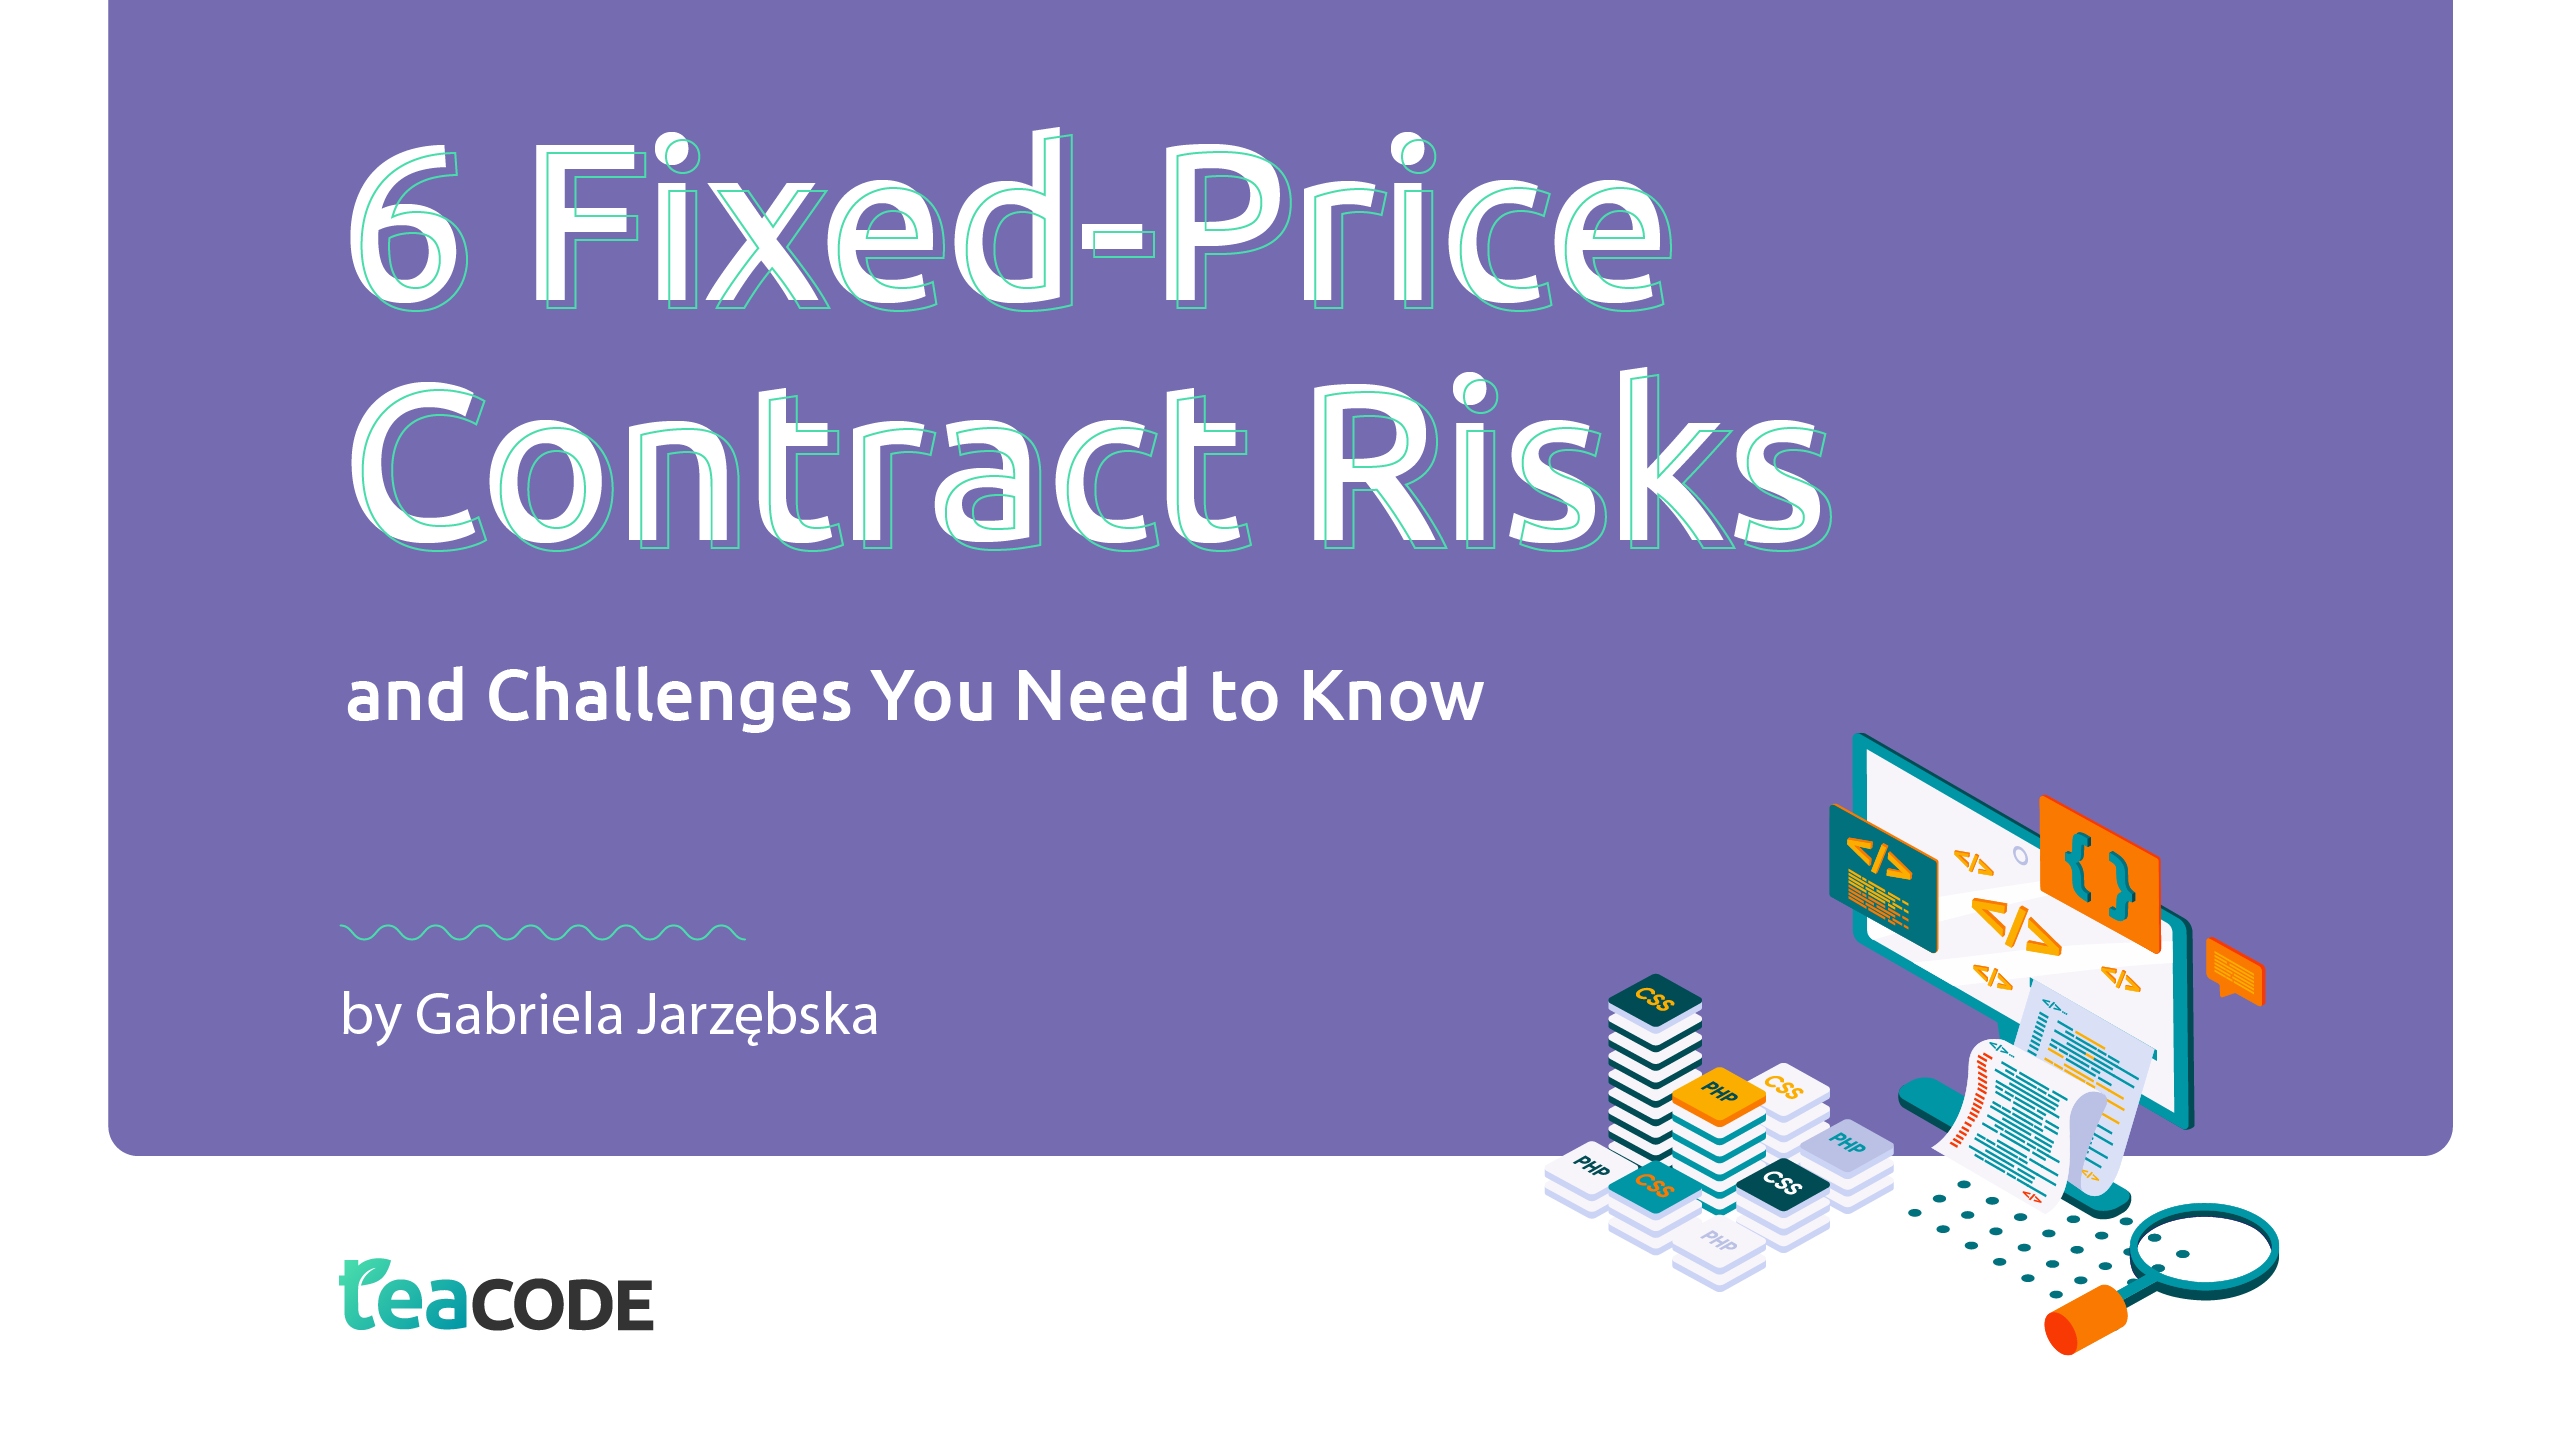 6 Fixed-Price Contract Risks and Challenges You Need to Know